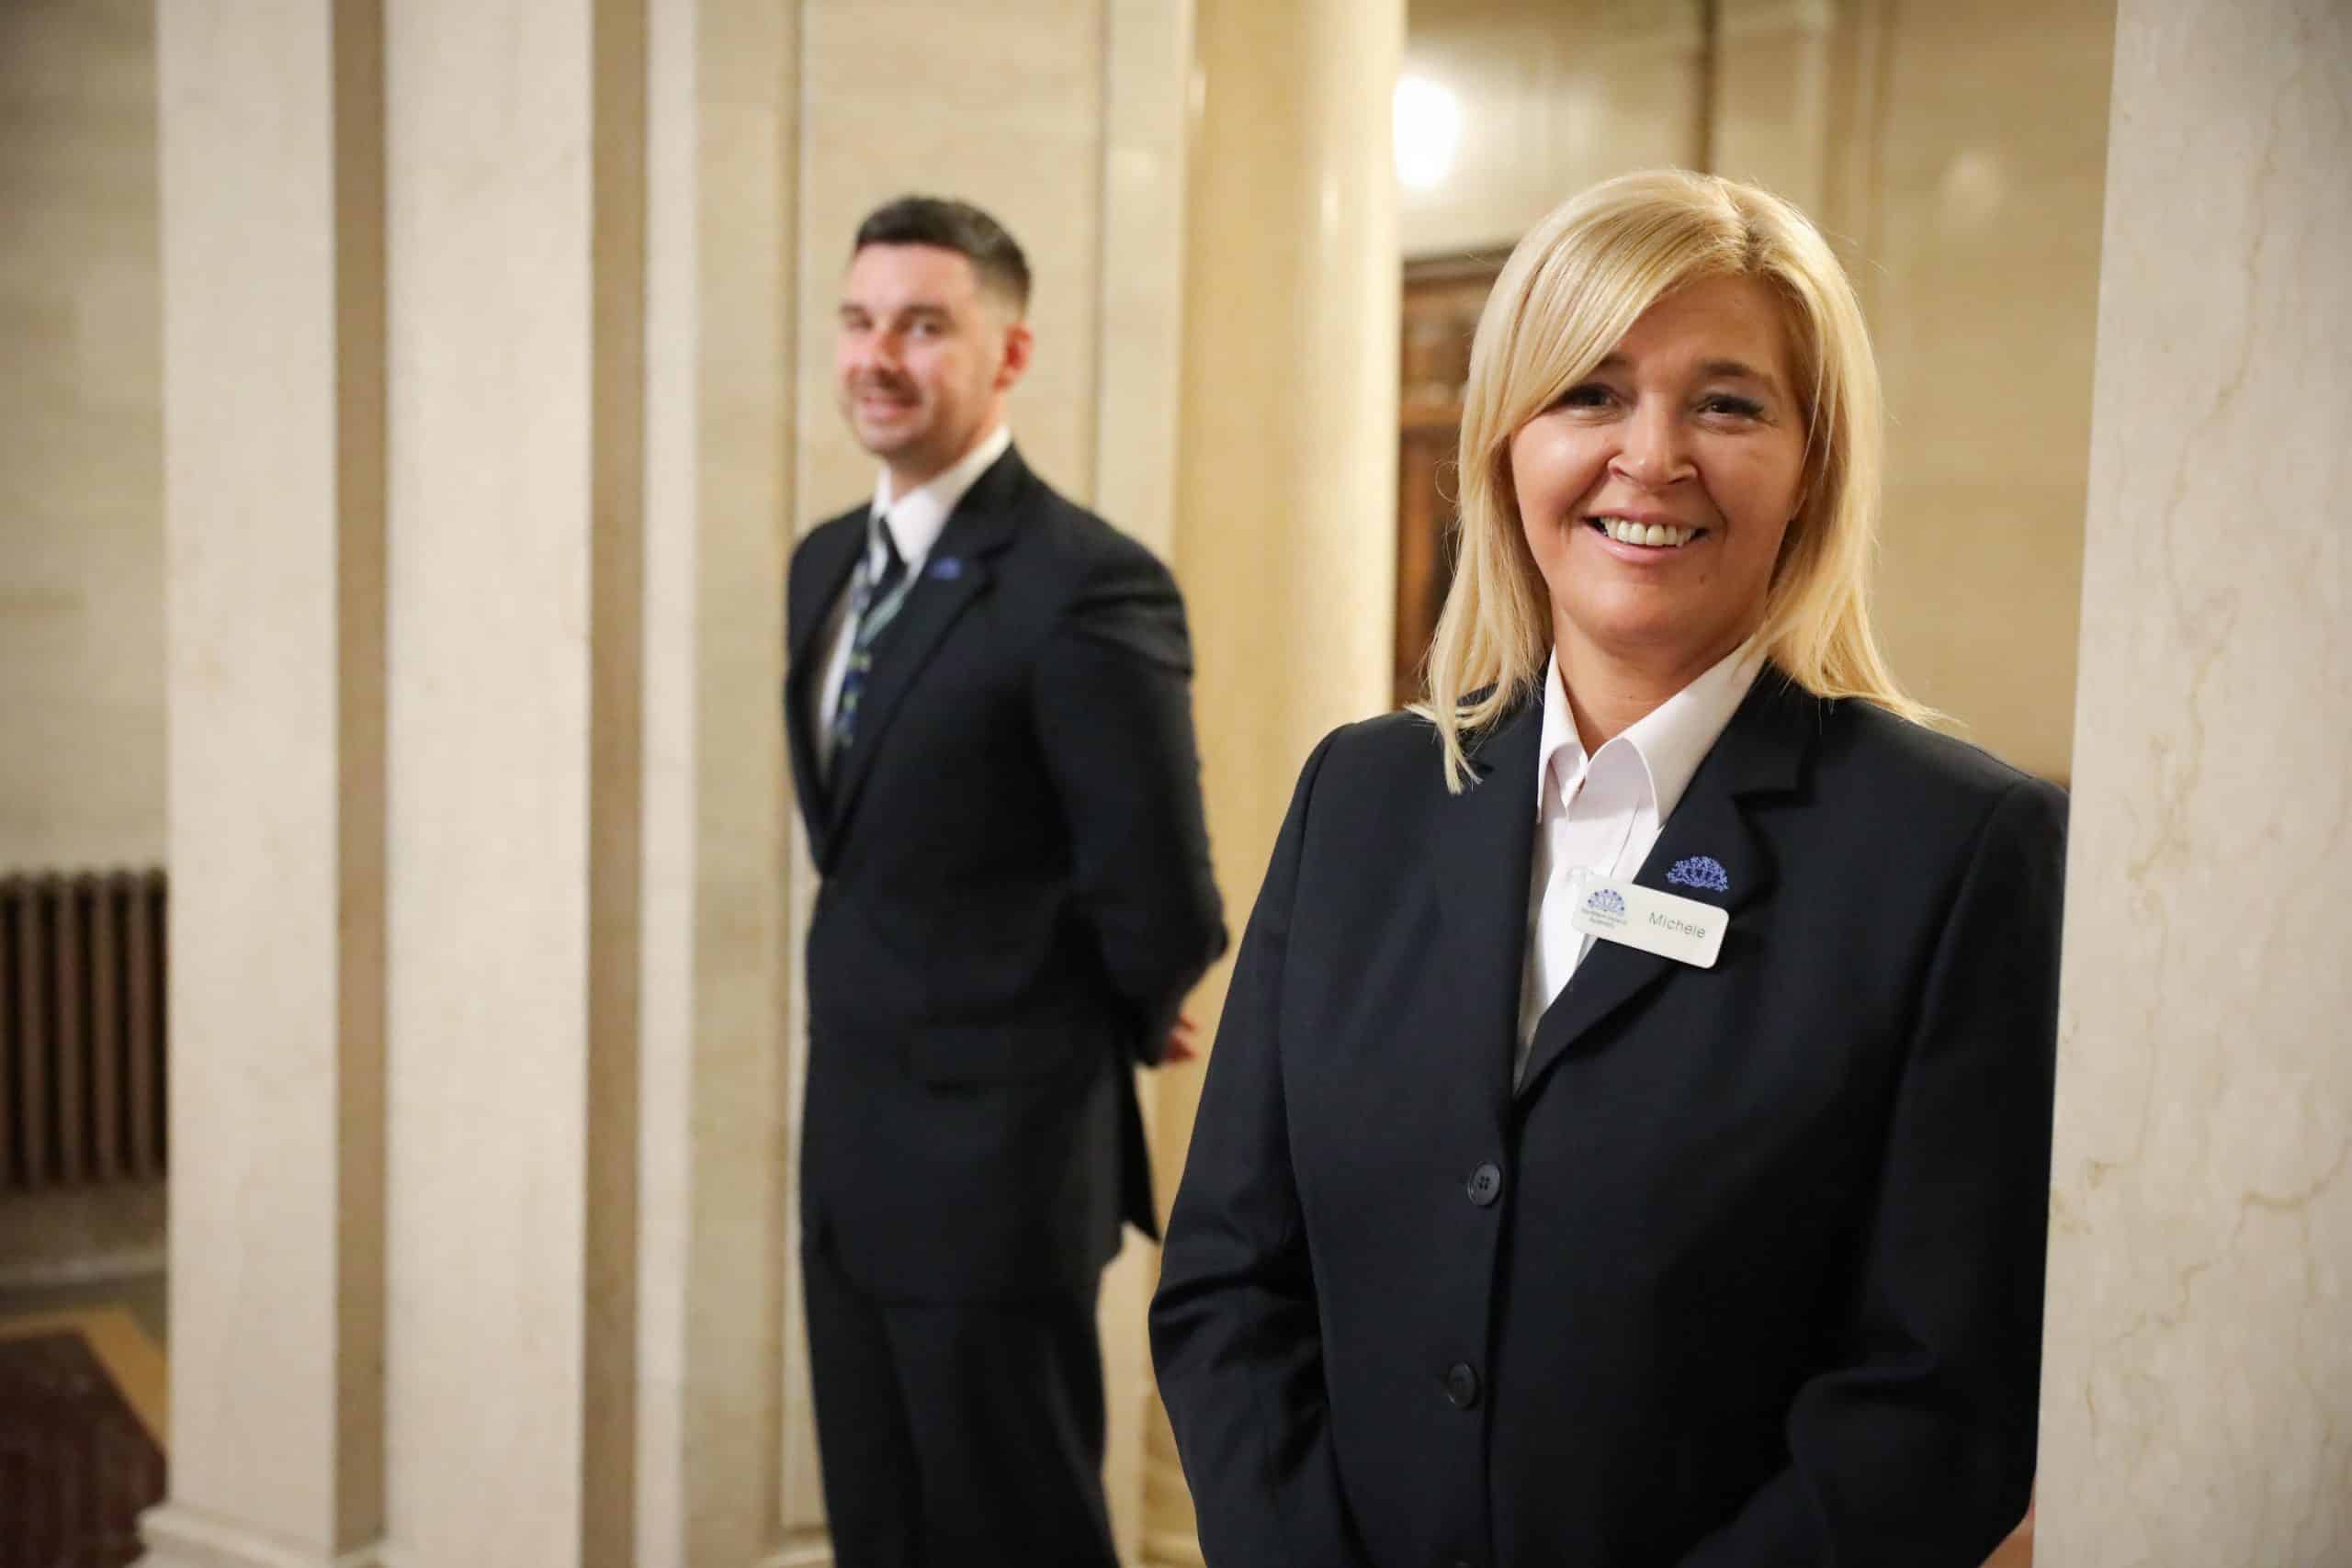 Friendly Ushers prepare to greet visitors to Parliament Buildings